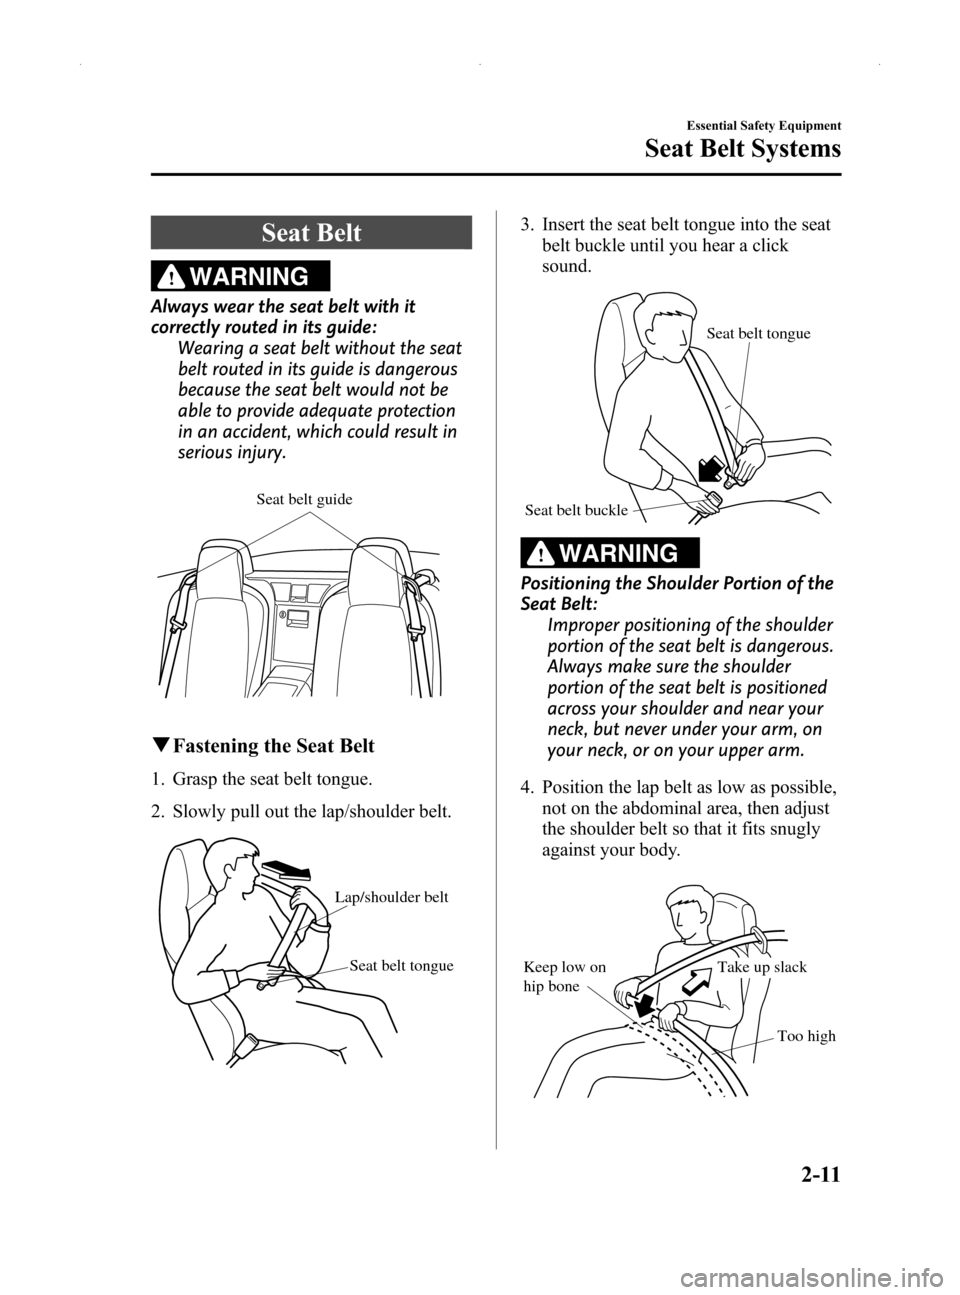 MAZDA MODEL MX-5 2014  Owners Manual (in English) Black plate (23,1)
Seat Belt
WARNING
Always wear the seat belt with it
correctly routed in its guide:Wearing a seat belt without the seat
belt routed in its guide is dangerous
because the seat belt wo